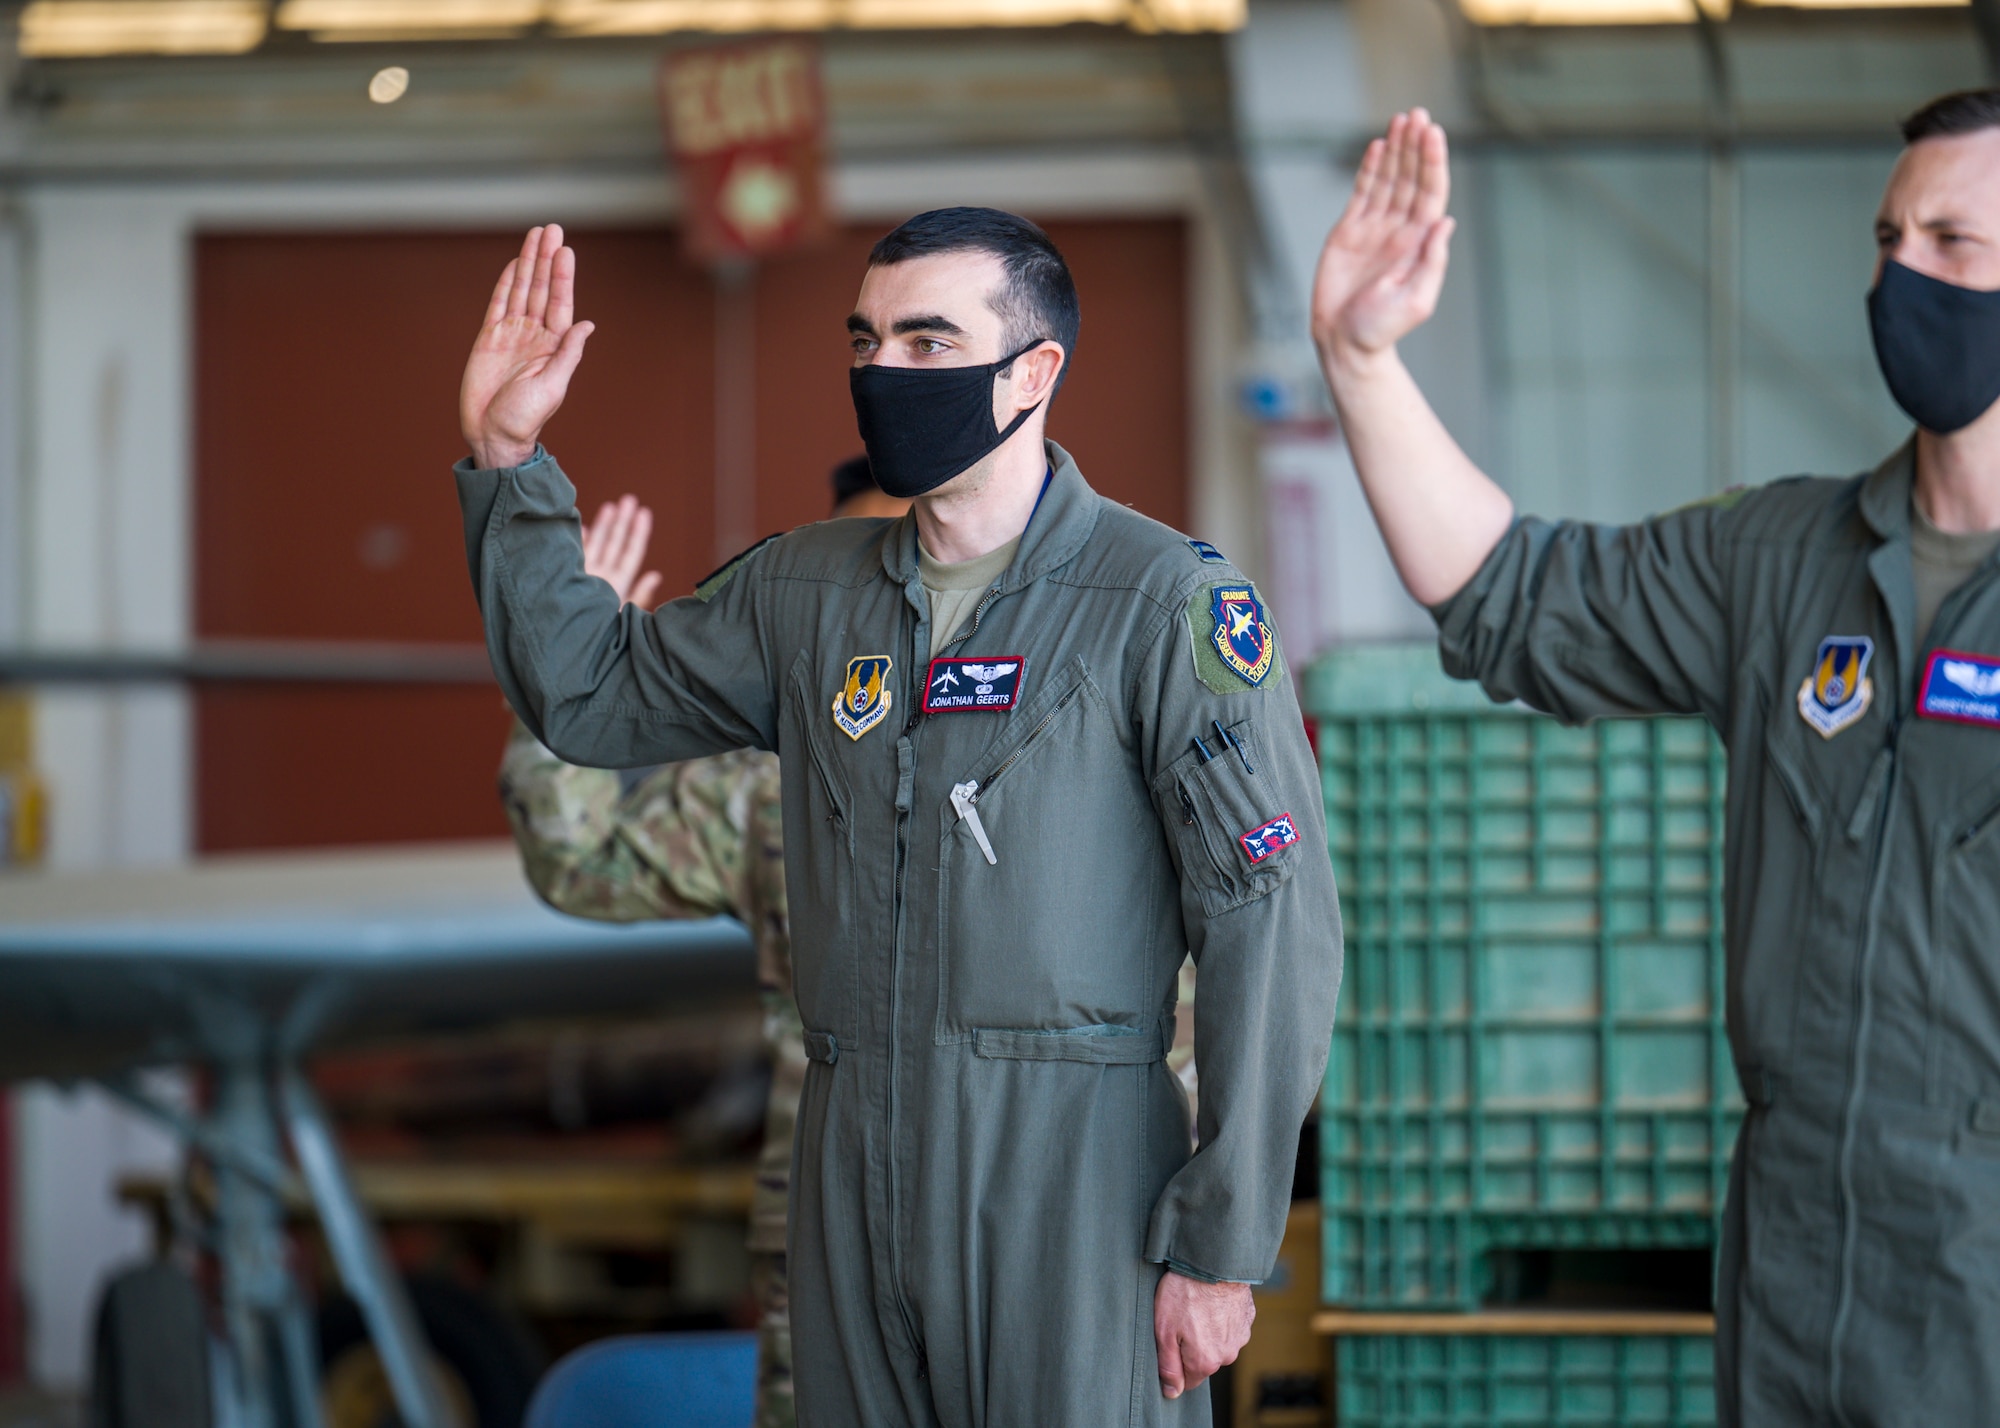 Capt. Jonathan Geerts, 419th Flight Test Squadron, originally of Berwyn, Pennsylvania, recites the oath of office during a Space Force Transfer Ceremony at Edwards Air Force Base, California, Feb. 11. (Air Force photo by Giancarlo Casem)